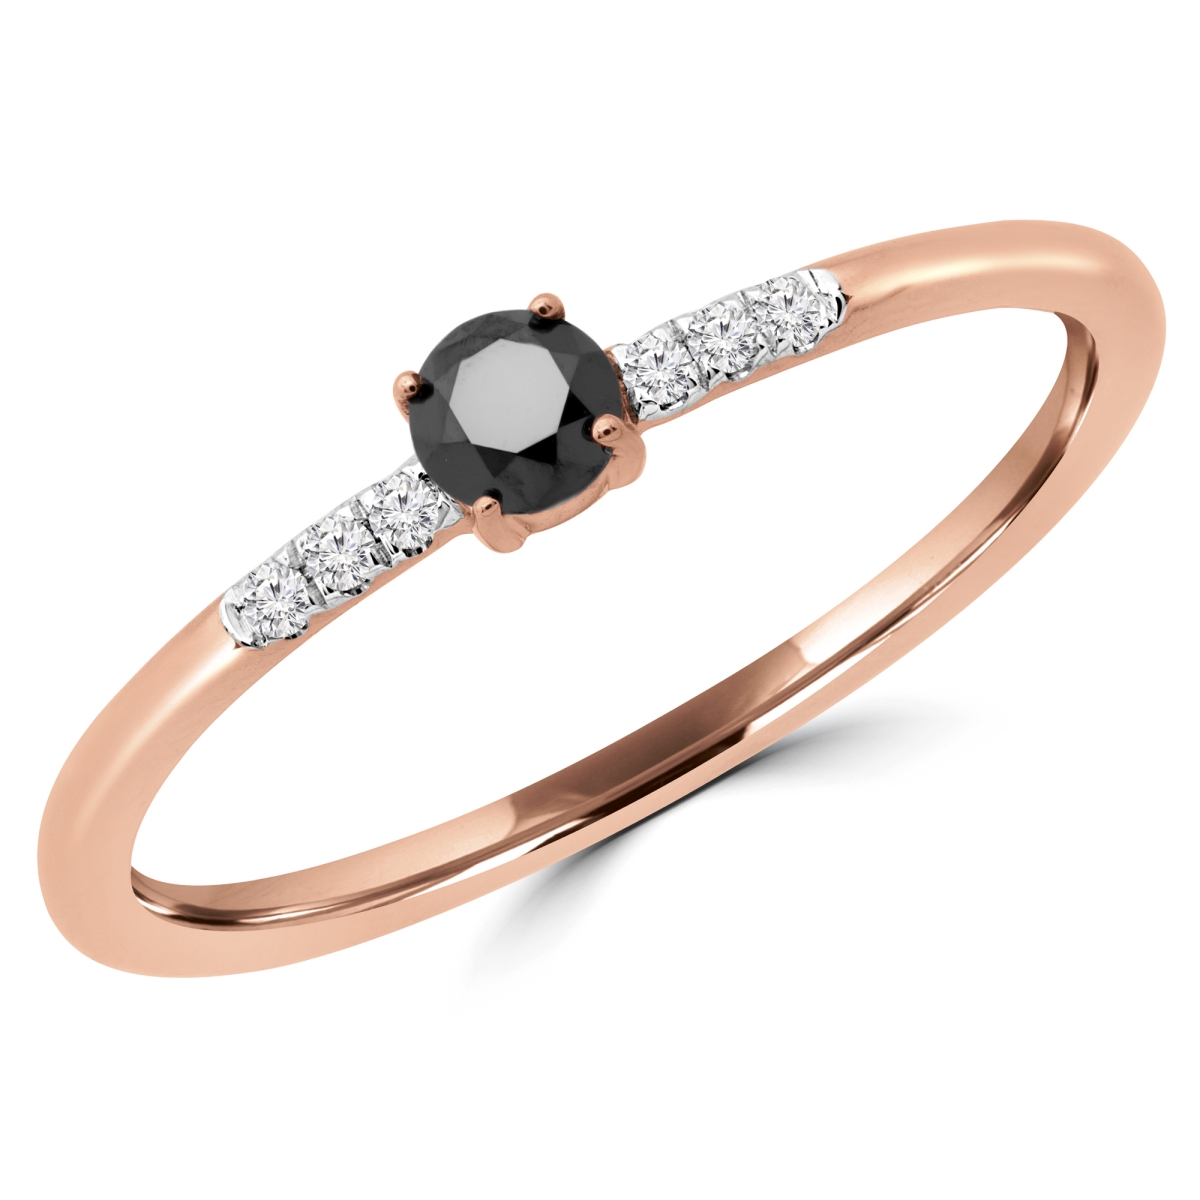 Picture of Majesty Diamonds MDR190079-5.25 0.16 CTW Round Black Diamond Bezel Set Cocktail Ring in 14K Rose Gold - Size 5.25